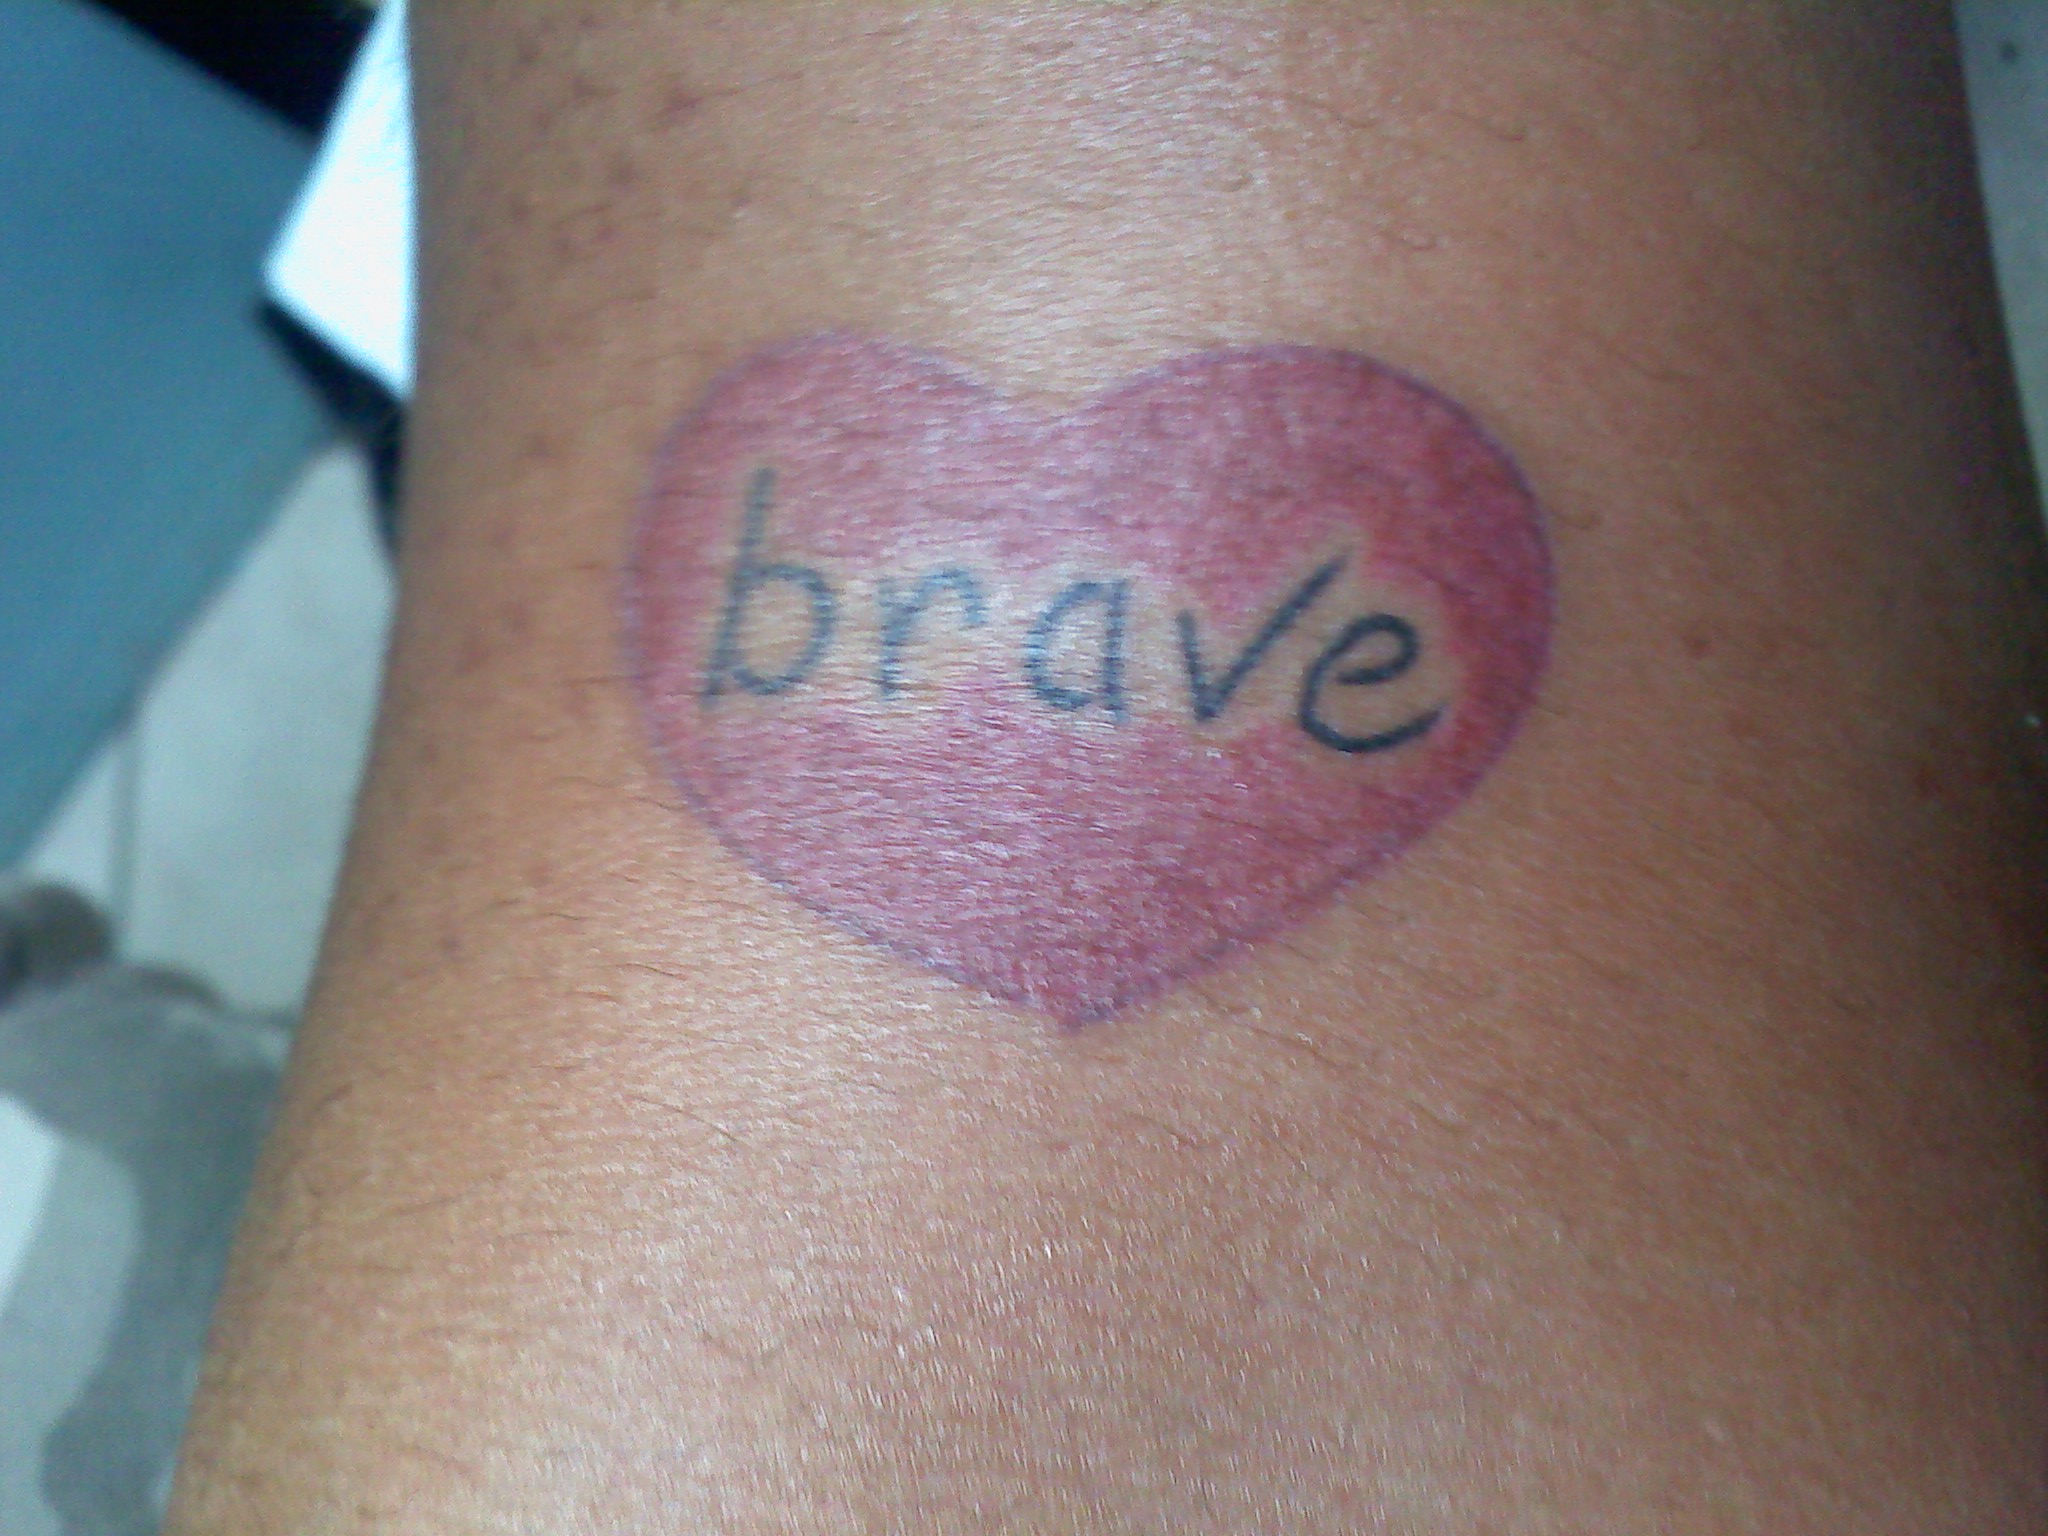 A tattoo of a heart with the word brave. Photo by: tanjila ahmed, Creative Commons